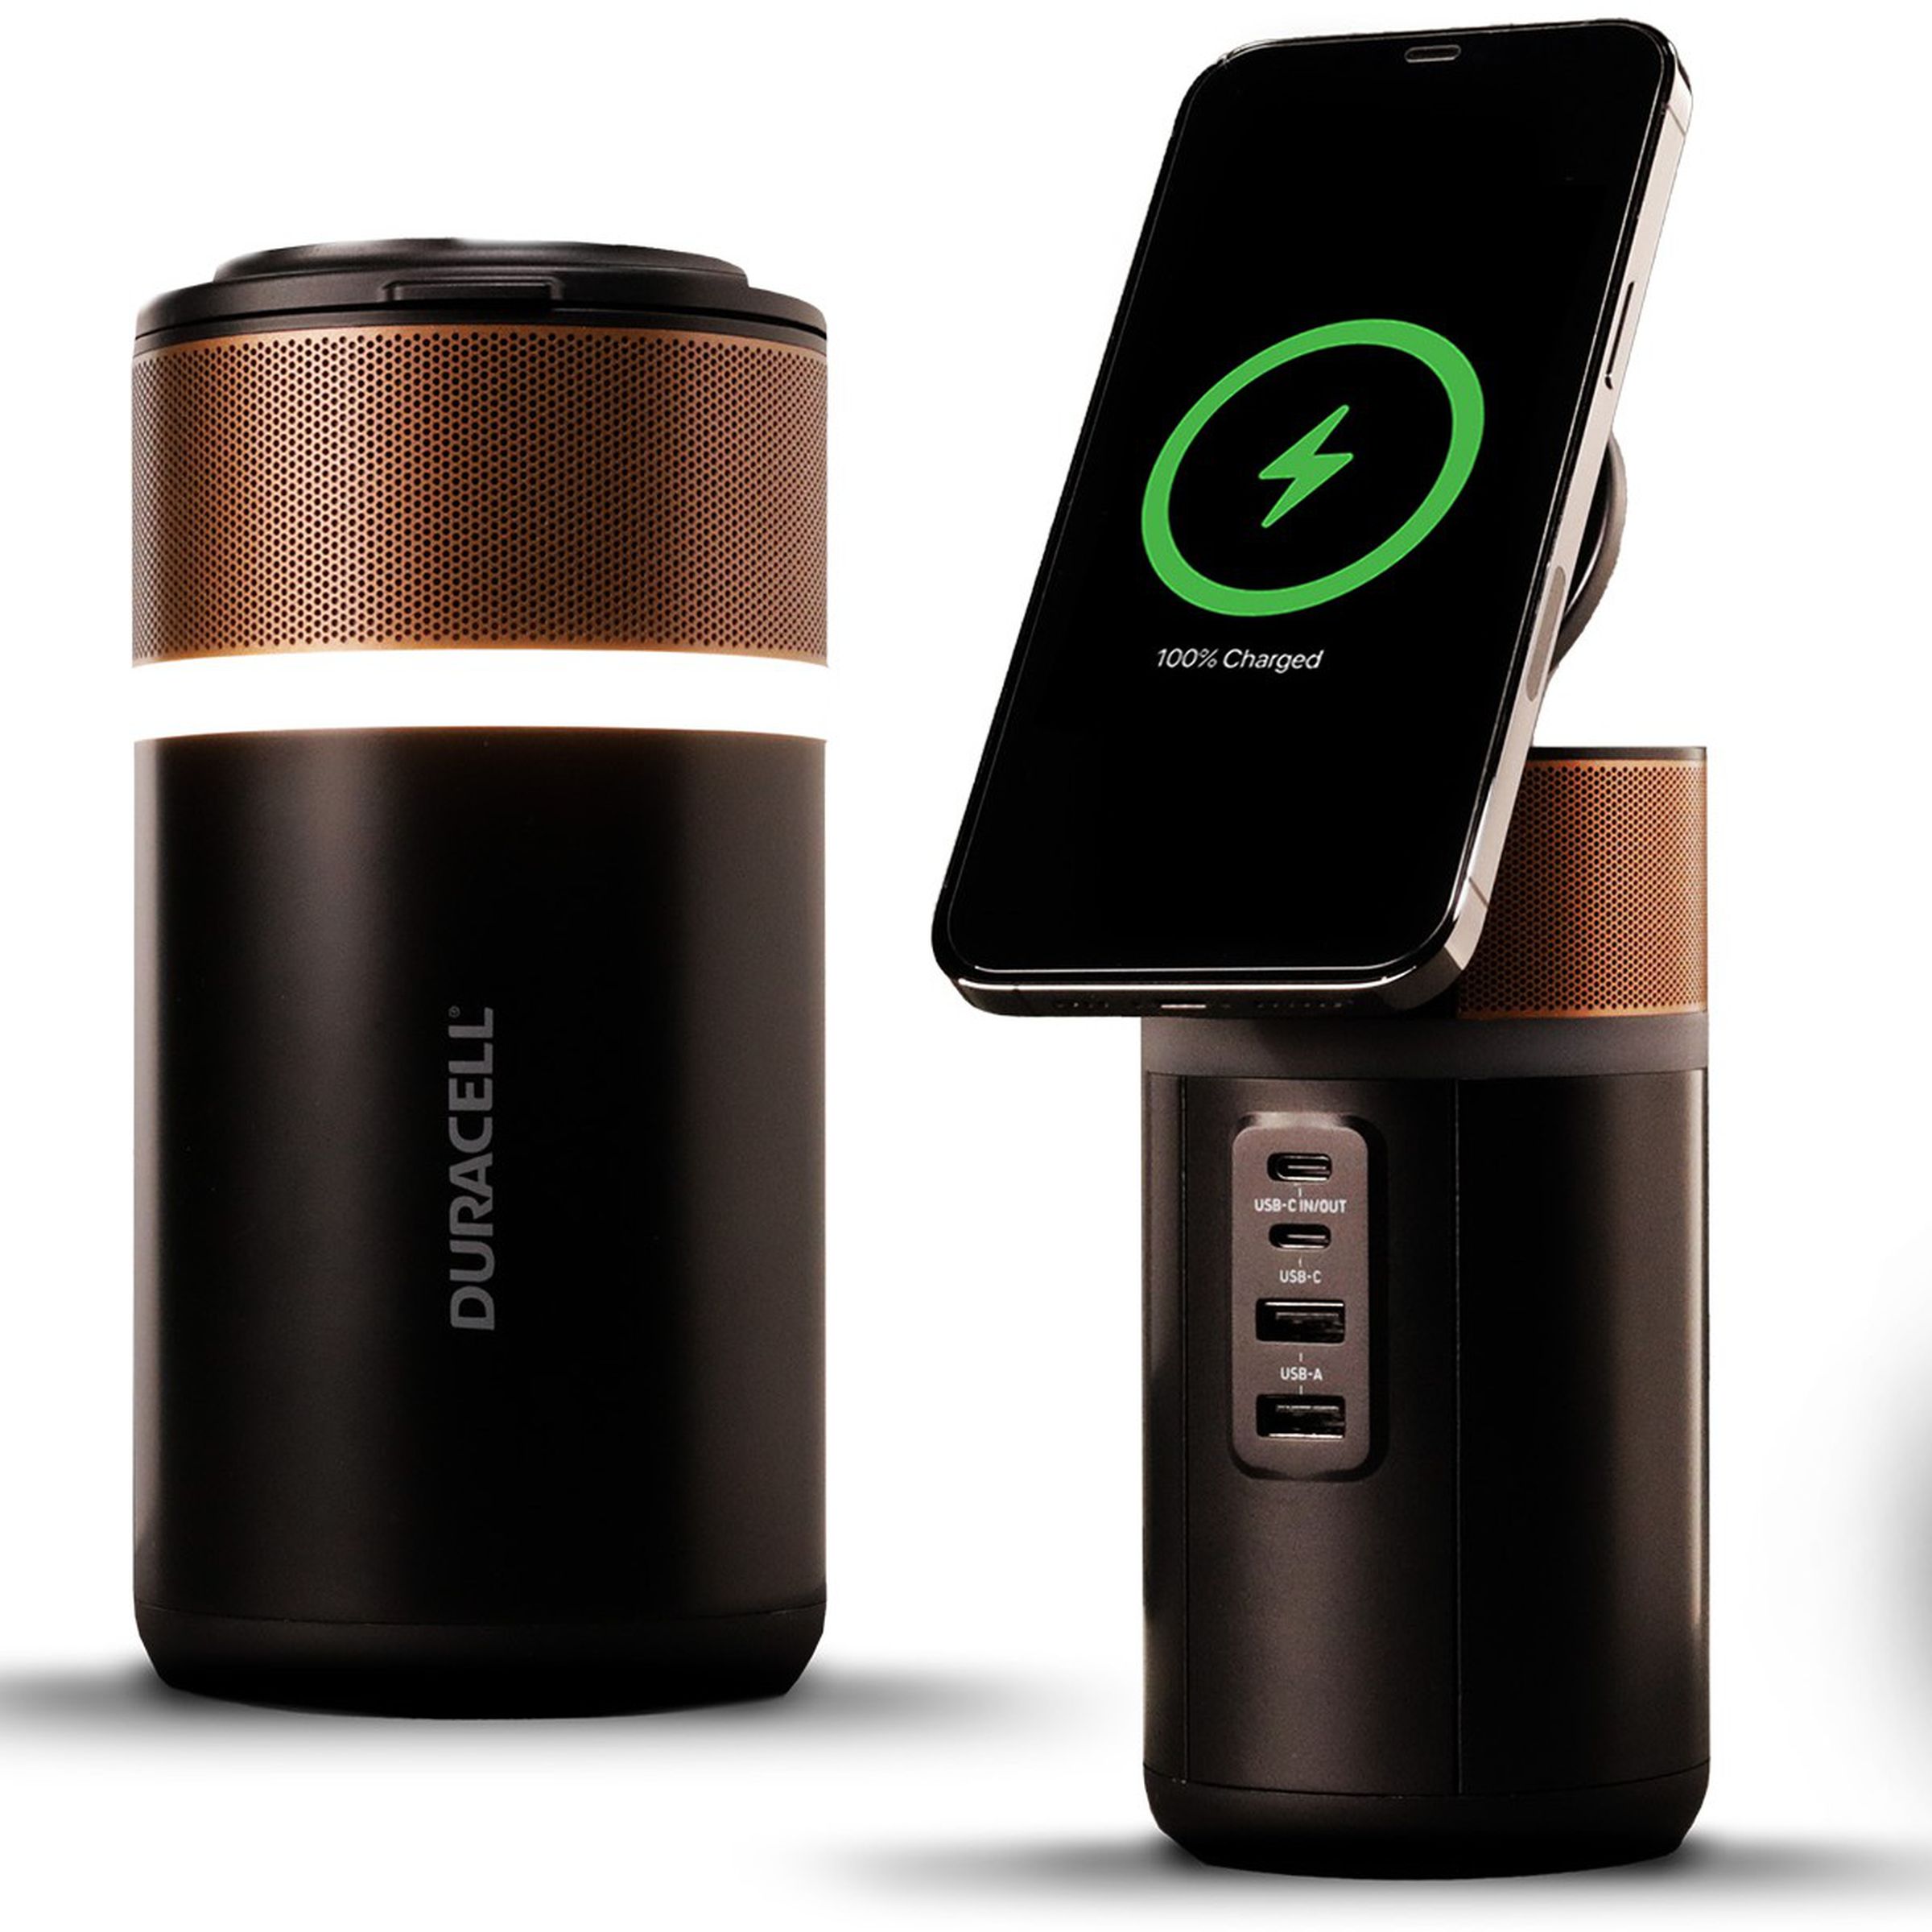 A canister-shaped power tower that looks like a coppertop Duracell battery with four USB ports on the front and a lid that opens to become a wireless charging pad for a phone